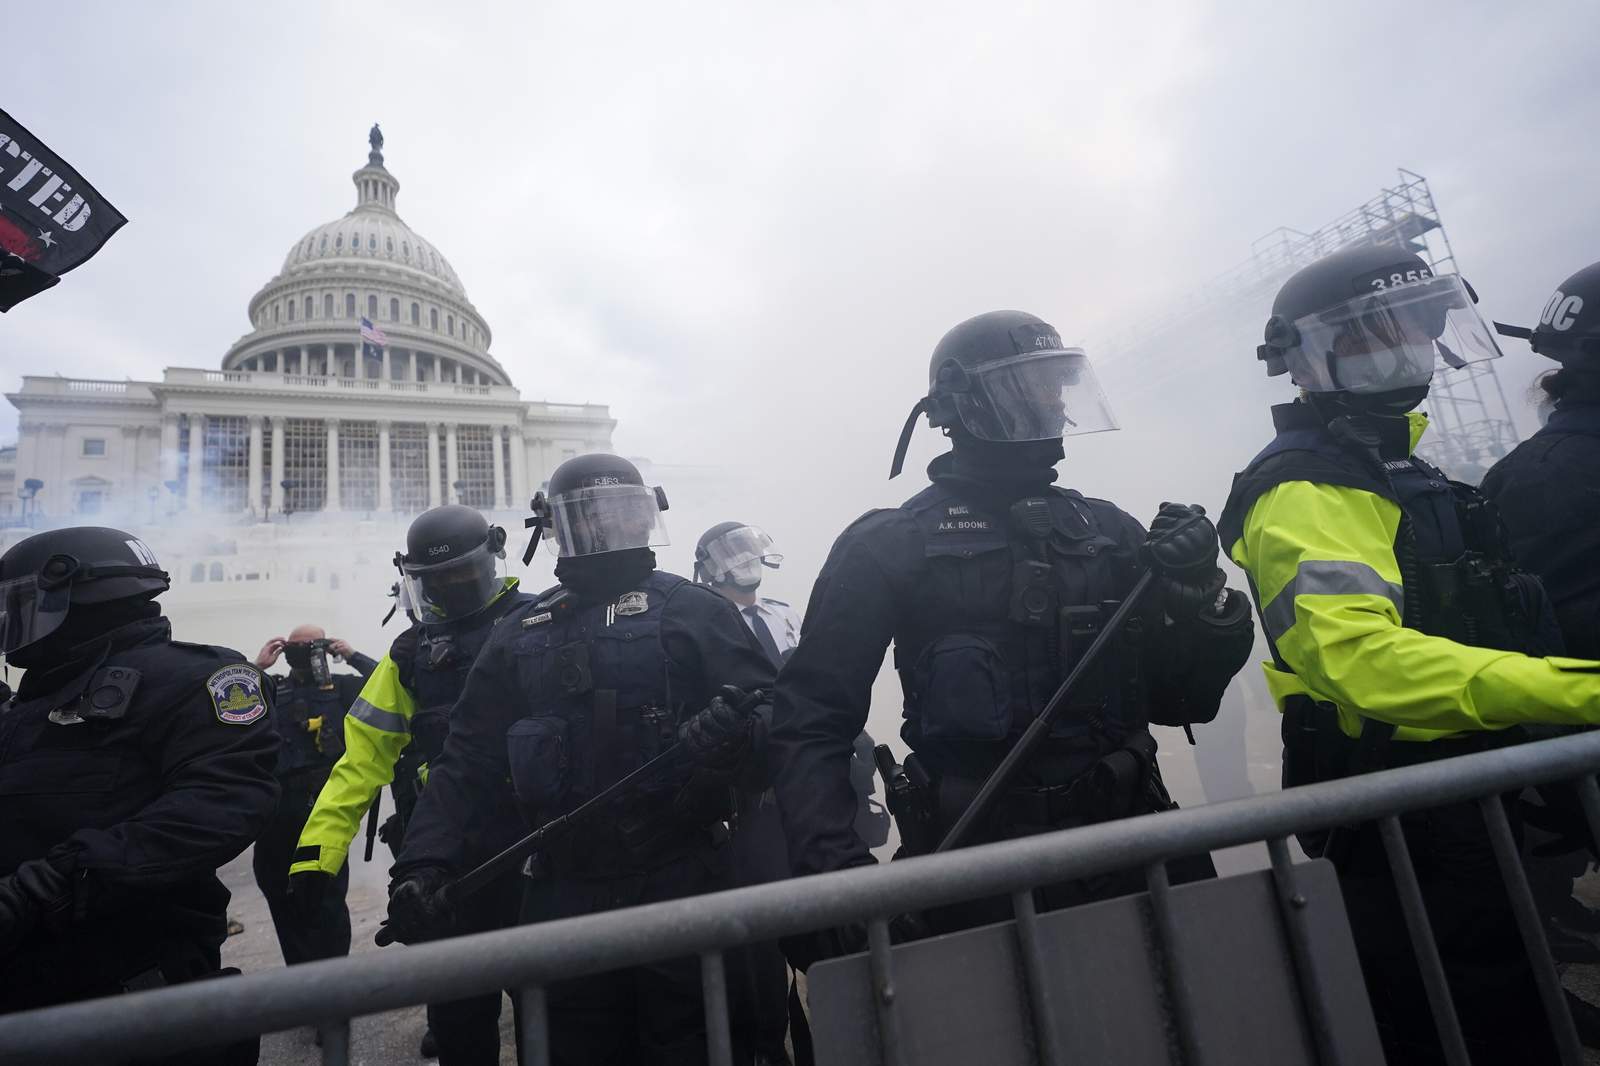 Activists wary of broader law enforcement after Capitol riot